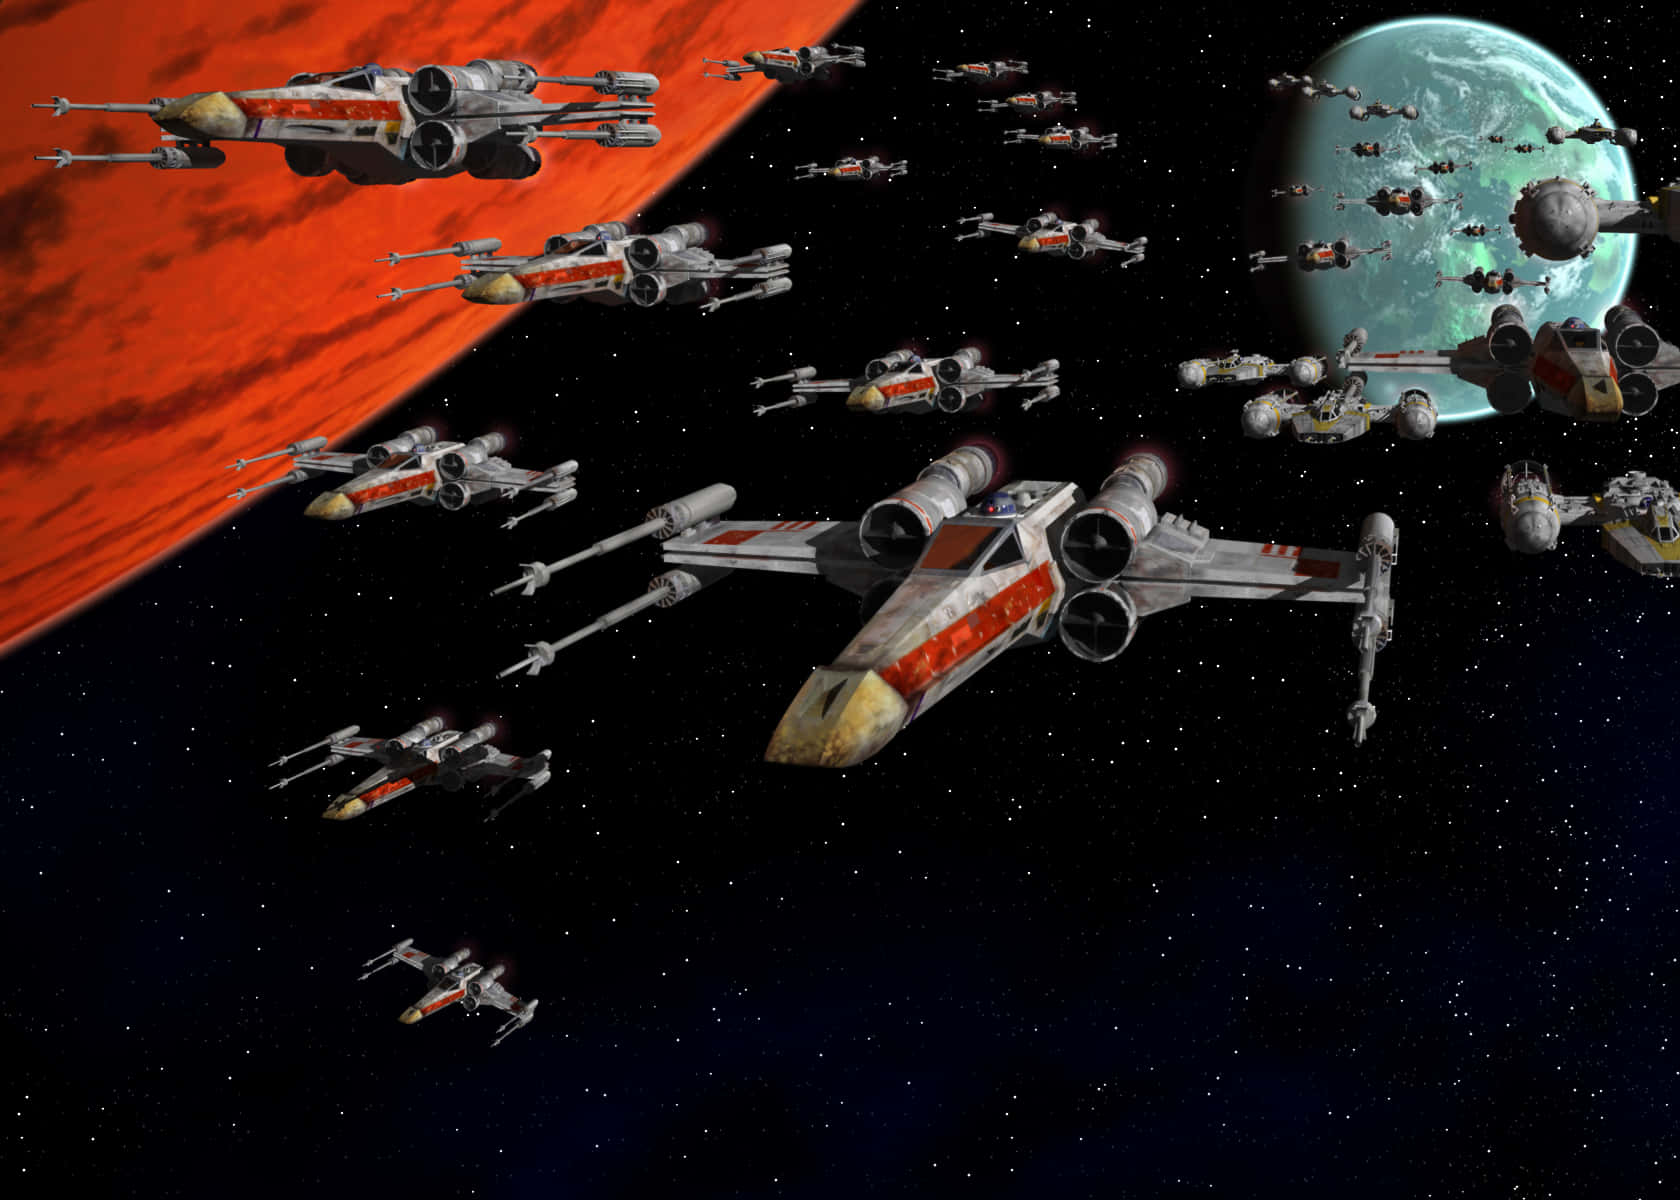 “The iconic X-Wing fighter from Star Wars enters a daring assault.” Wallpaper